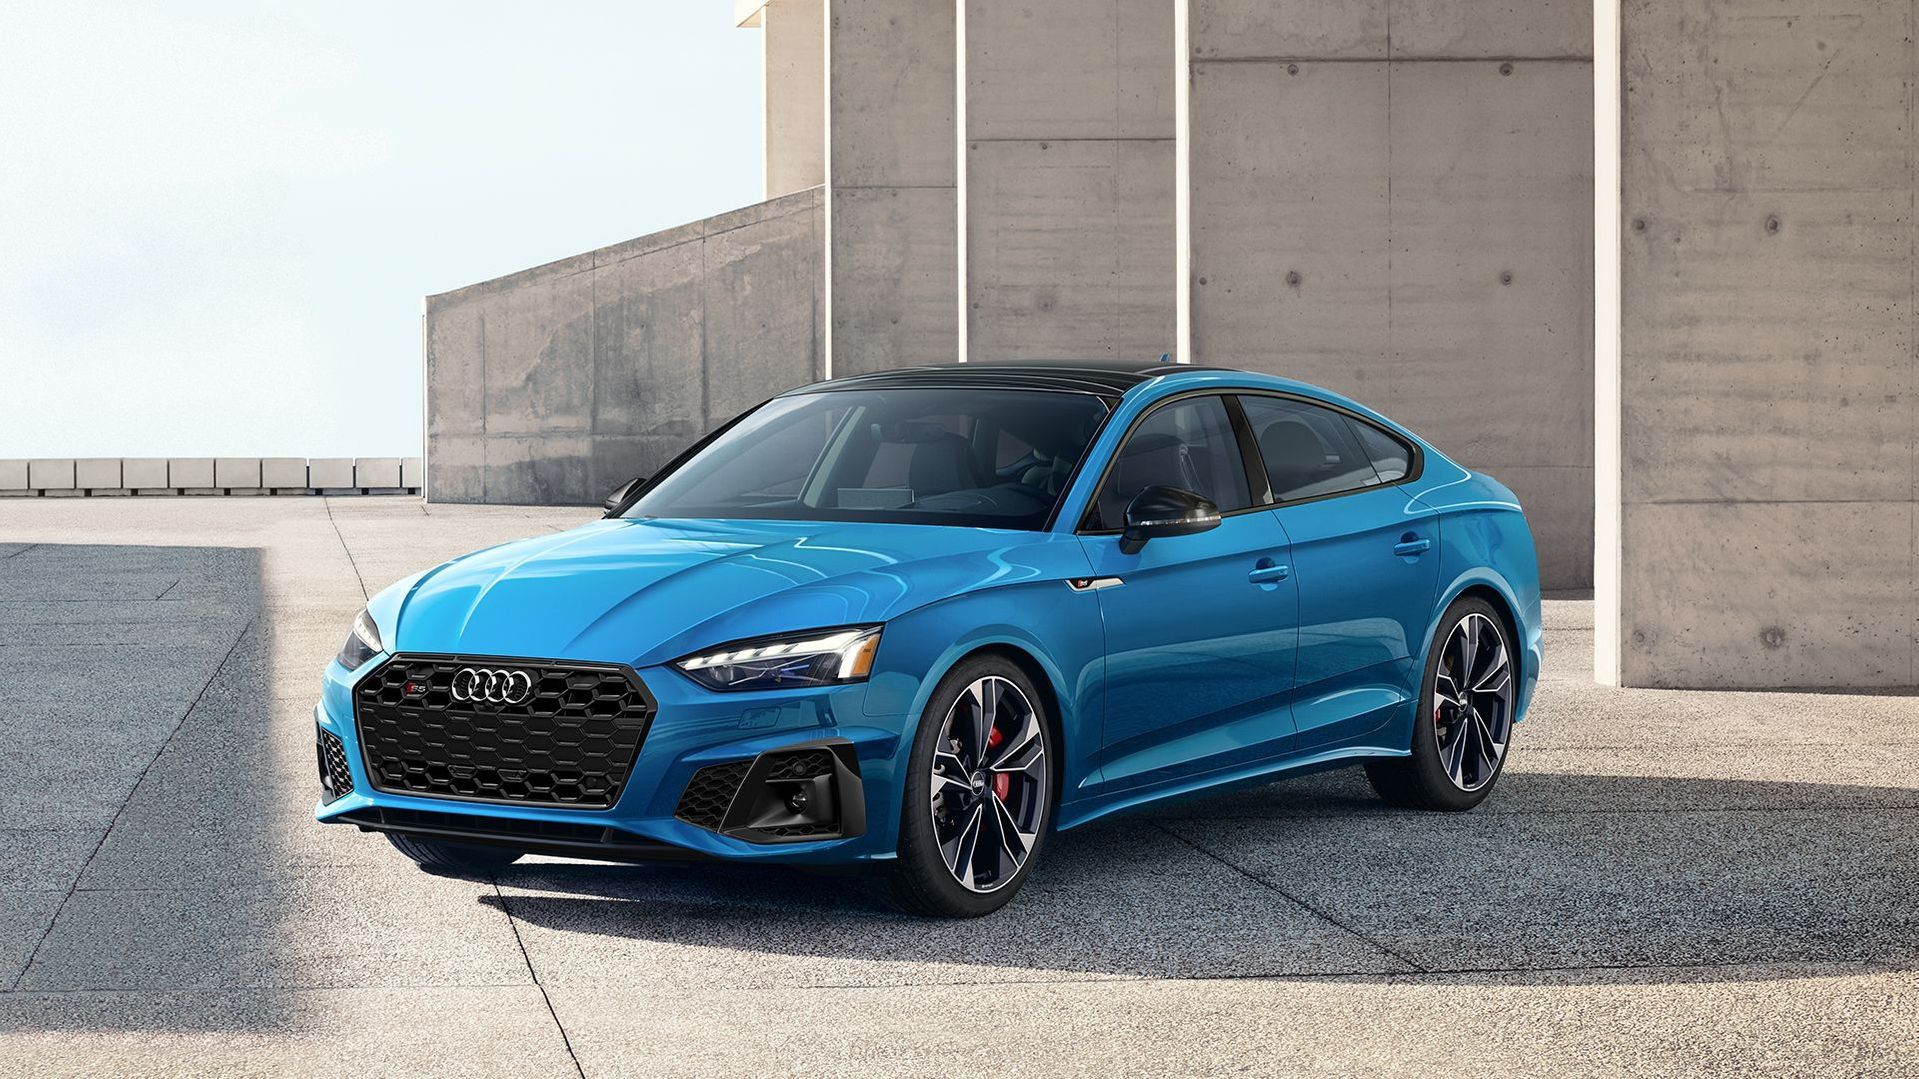 2021 Audi S5 Sportback Review, Pricing, and Specs